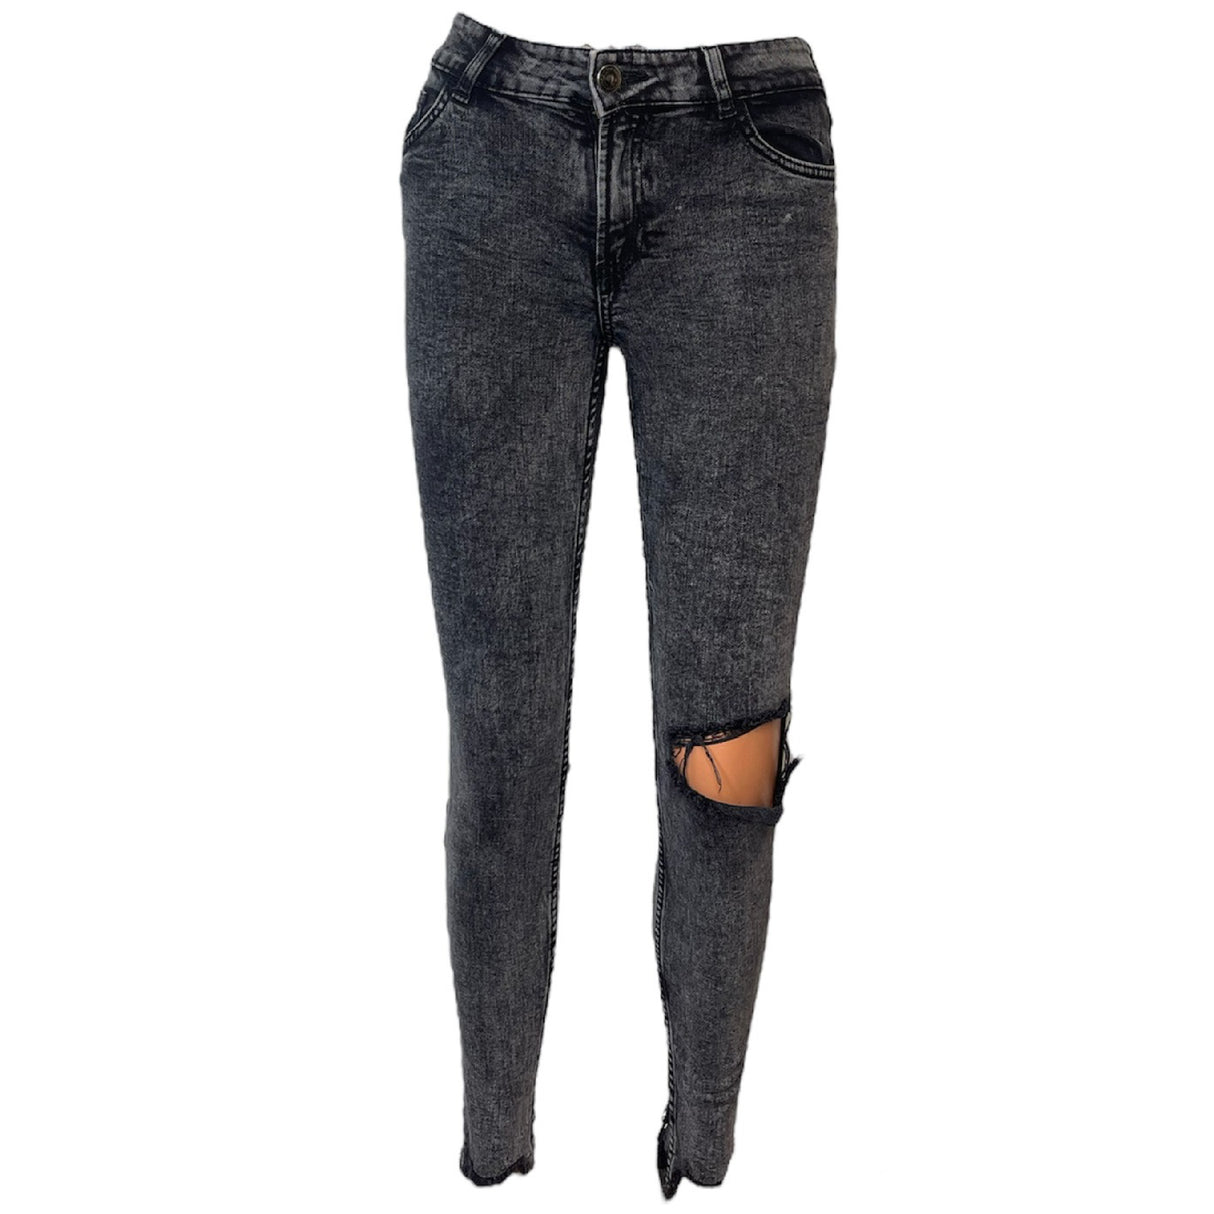 A Second Chance - Bershka Denim Grey Women - Delivery All Over Lebanon